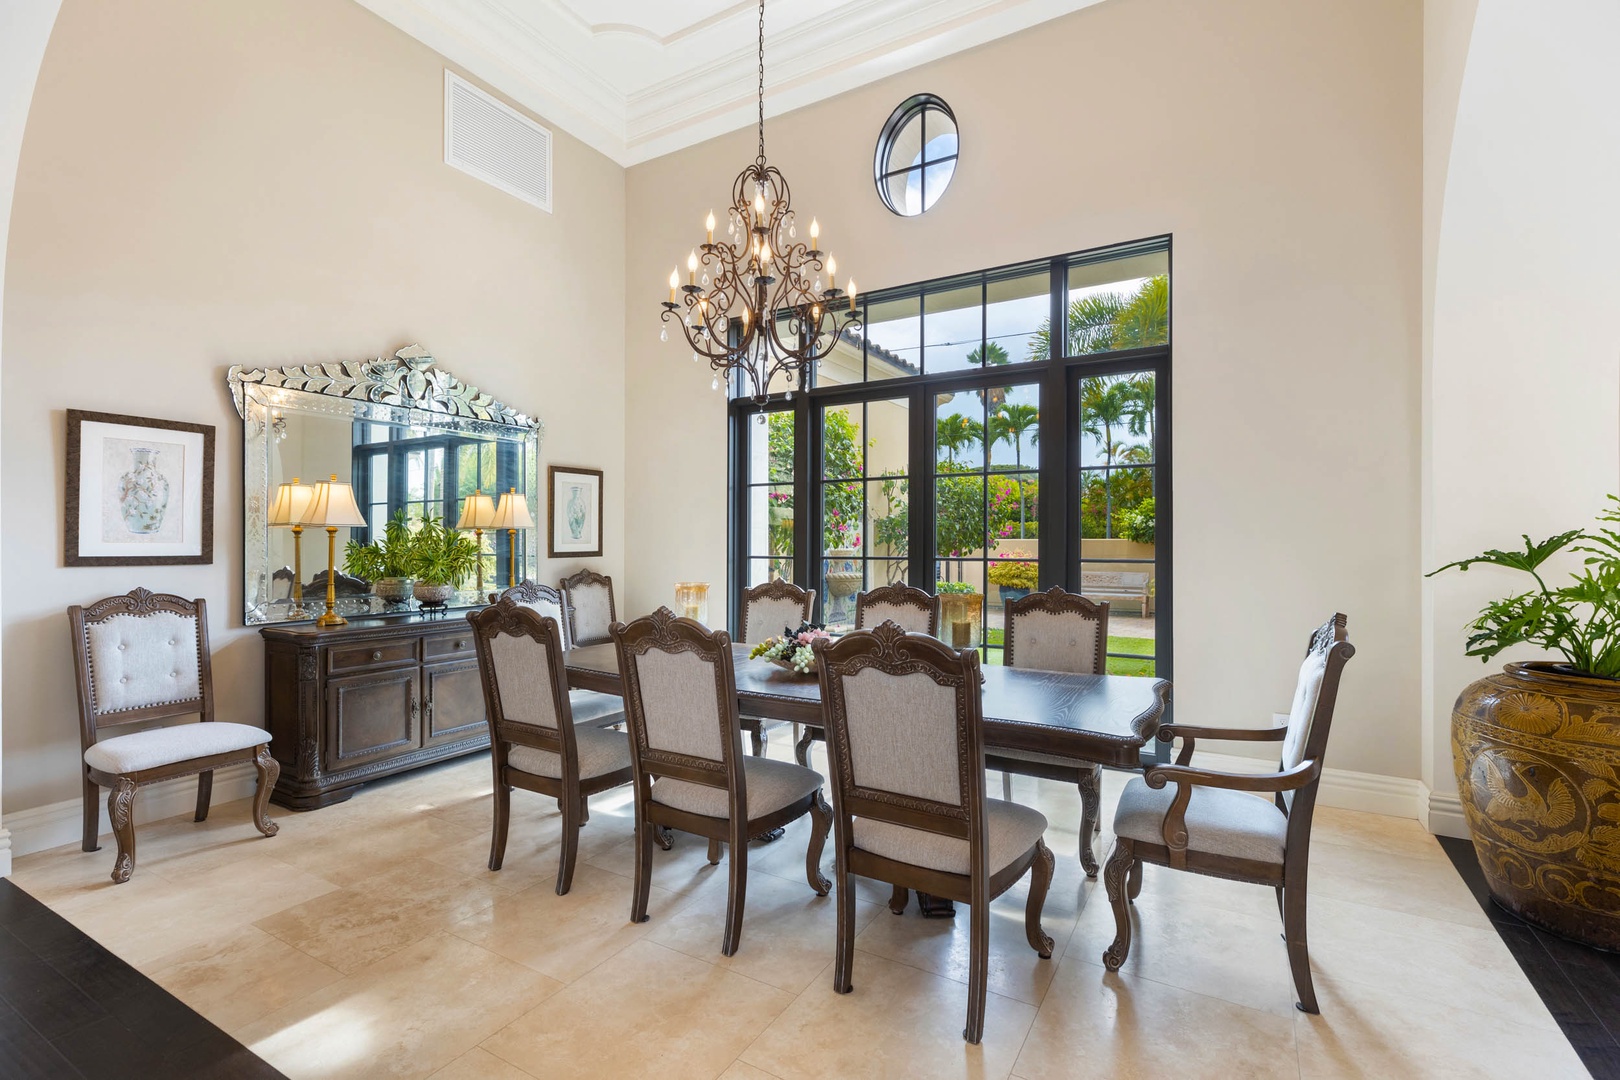 Honolulu Vacation Rentals, Royal Kahala Estate - Dining area with table for eight right off the formal living area for evening meals.